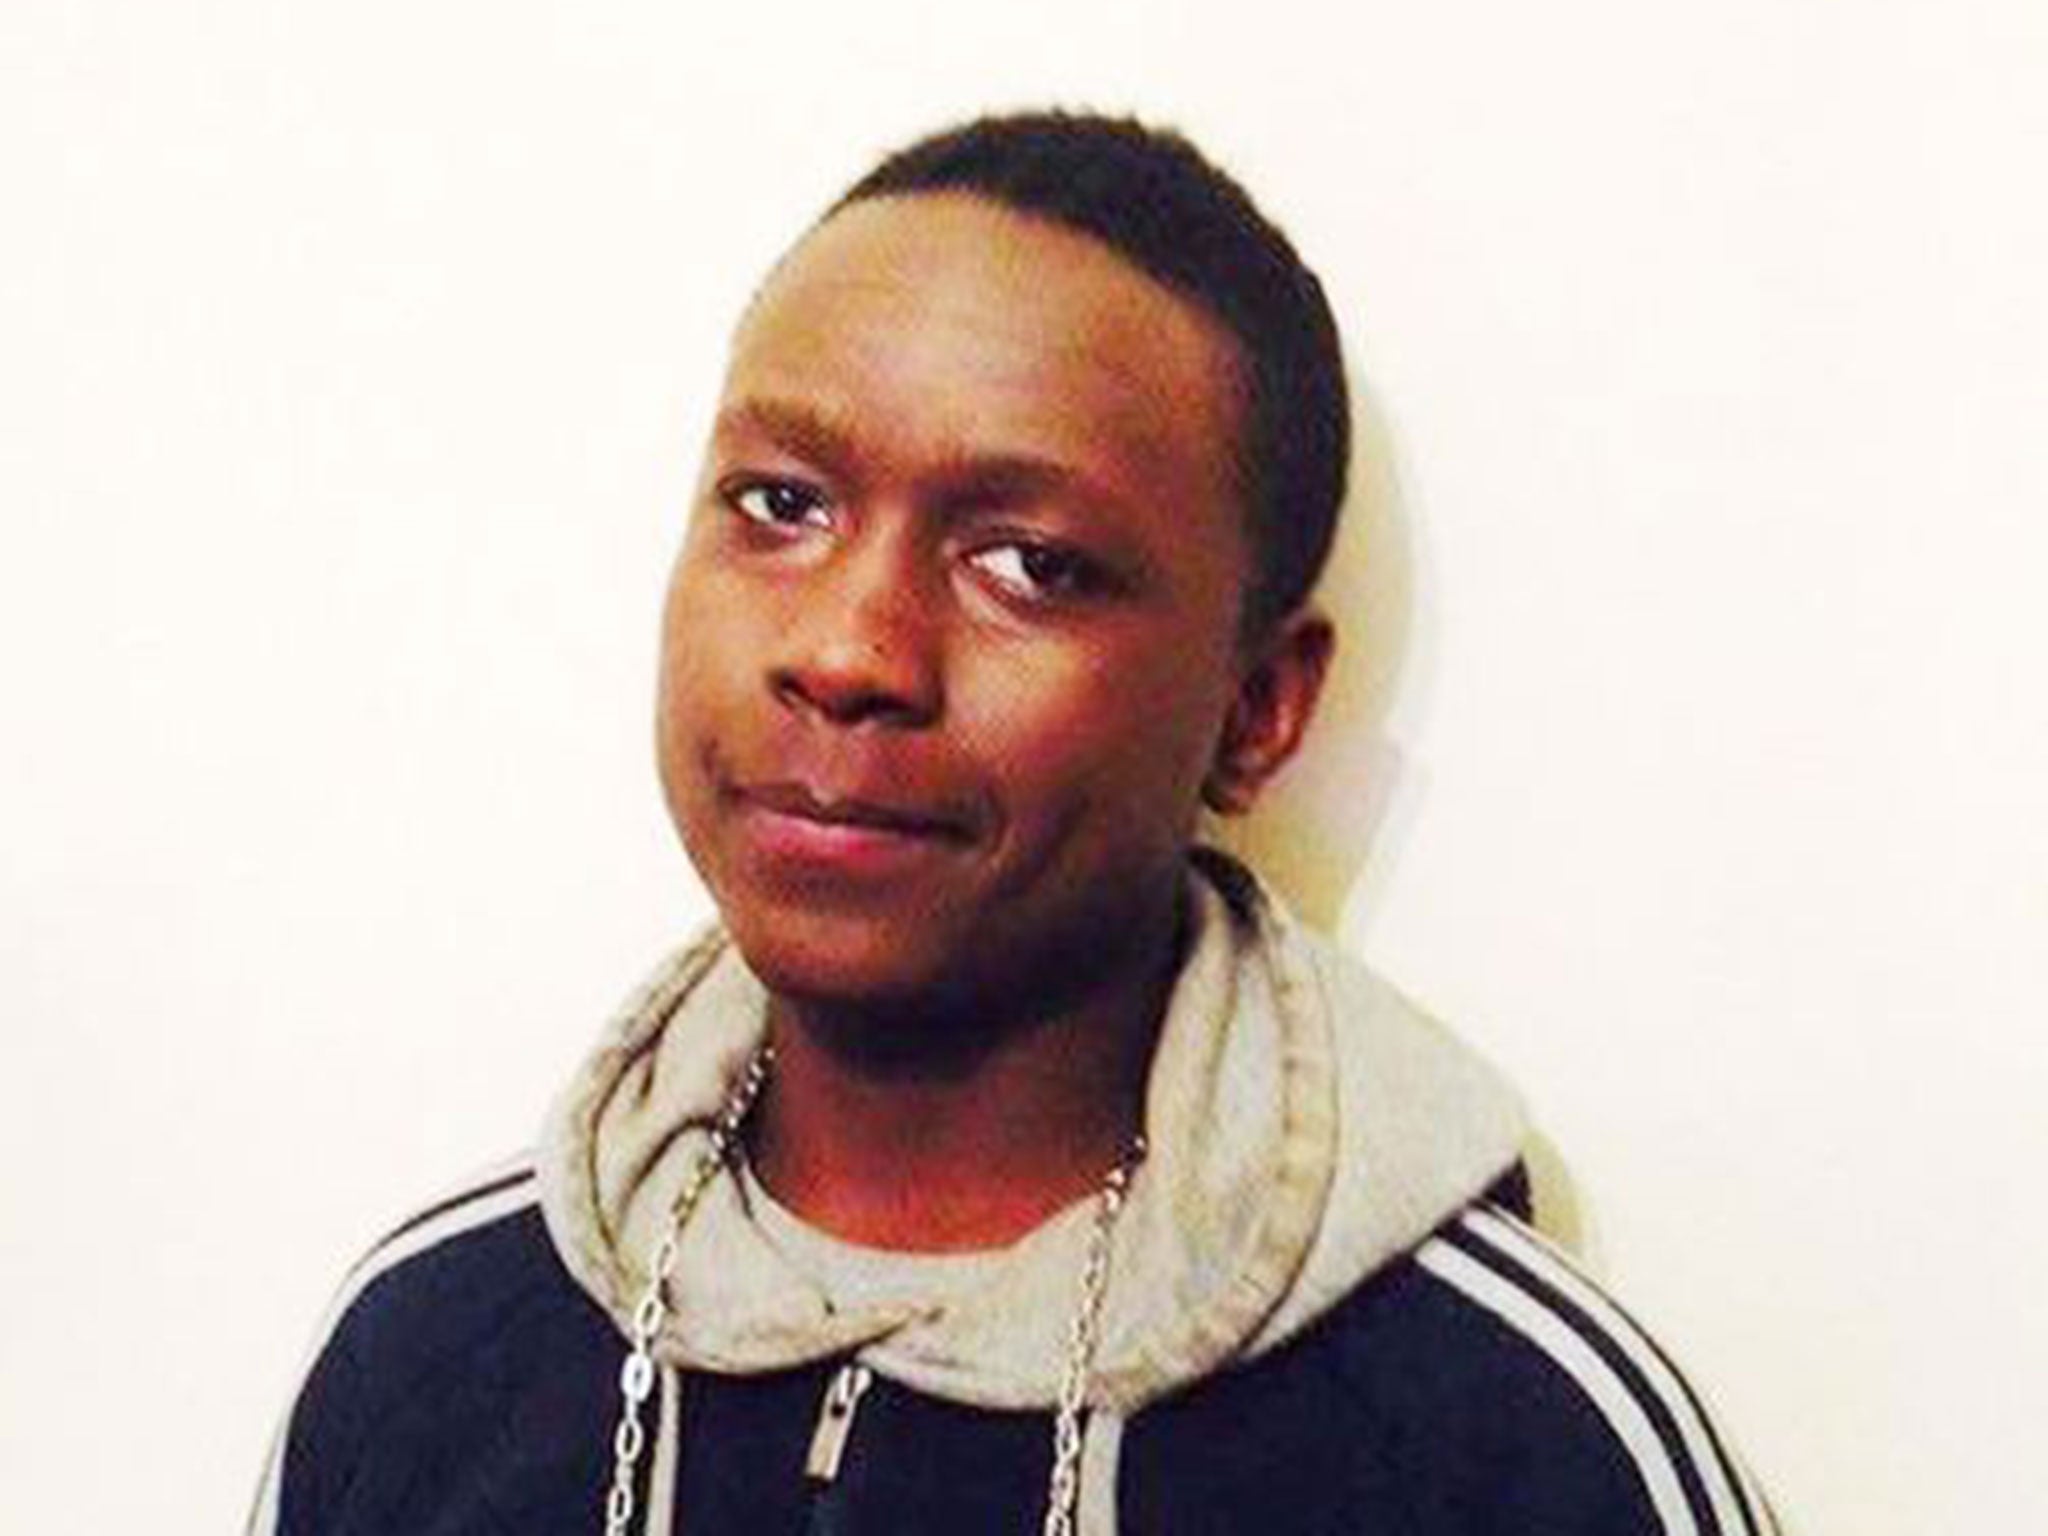 Kutyauripo was fatally stabbed in the chest. His family has appealed for anyone with information to contact the police